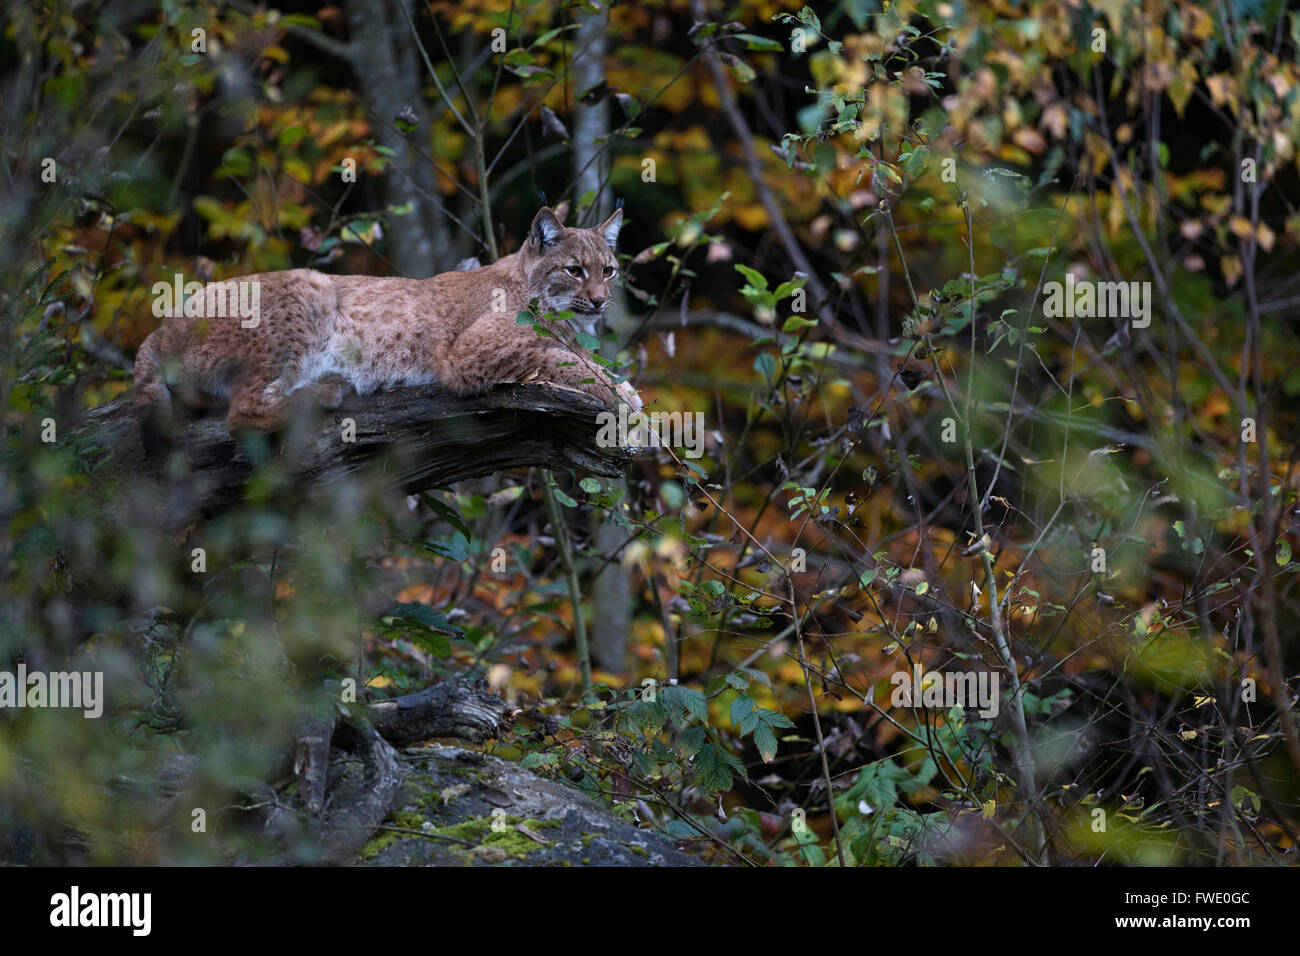 Eurasian Lynx / Eurasischer Luchs ( Lynx lynx ), adult animal, resting on a fallen tree in middle of autumn colored leaves. Stock Photo